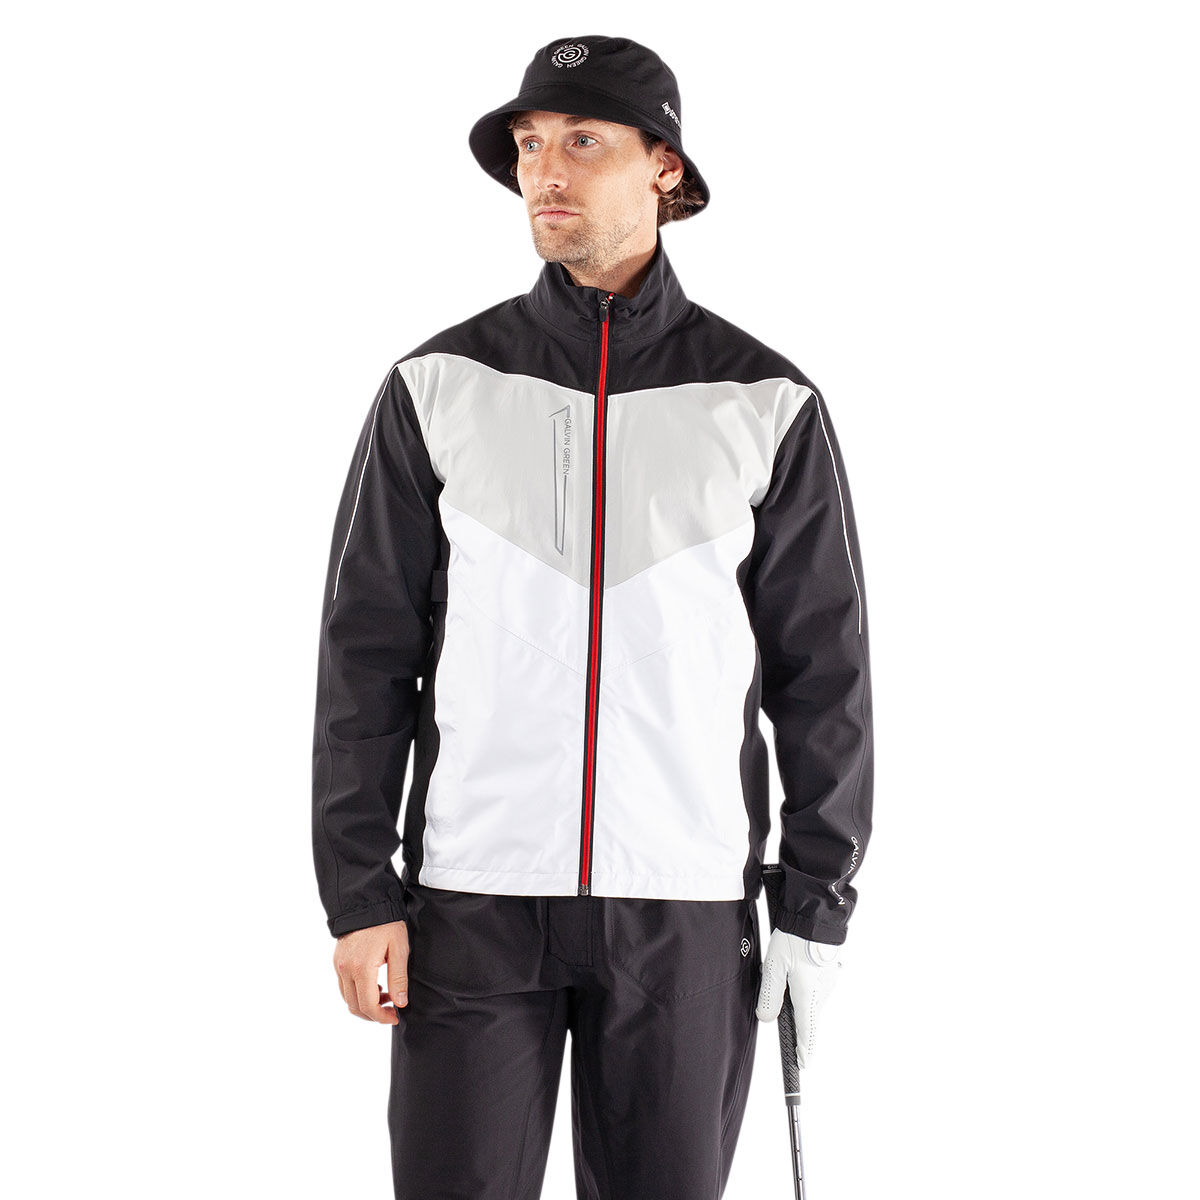 Galvin Green Men's Armstrong Waterproof Golf Jacket, Mens, Black/white/red, Small | American Golf von Galvin Green